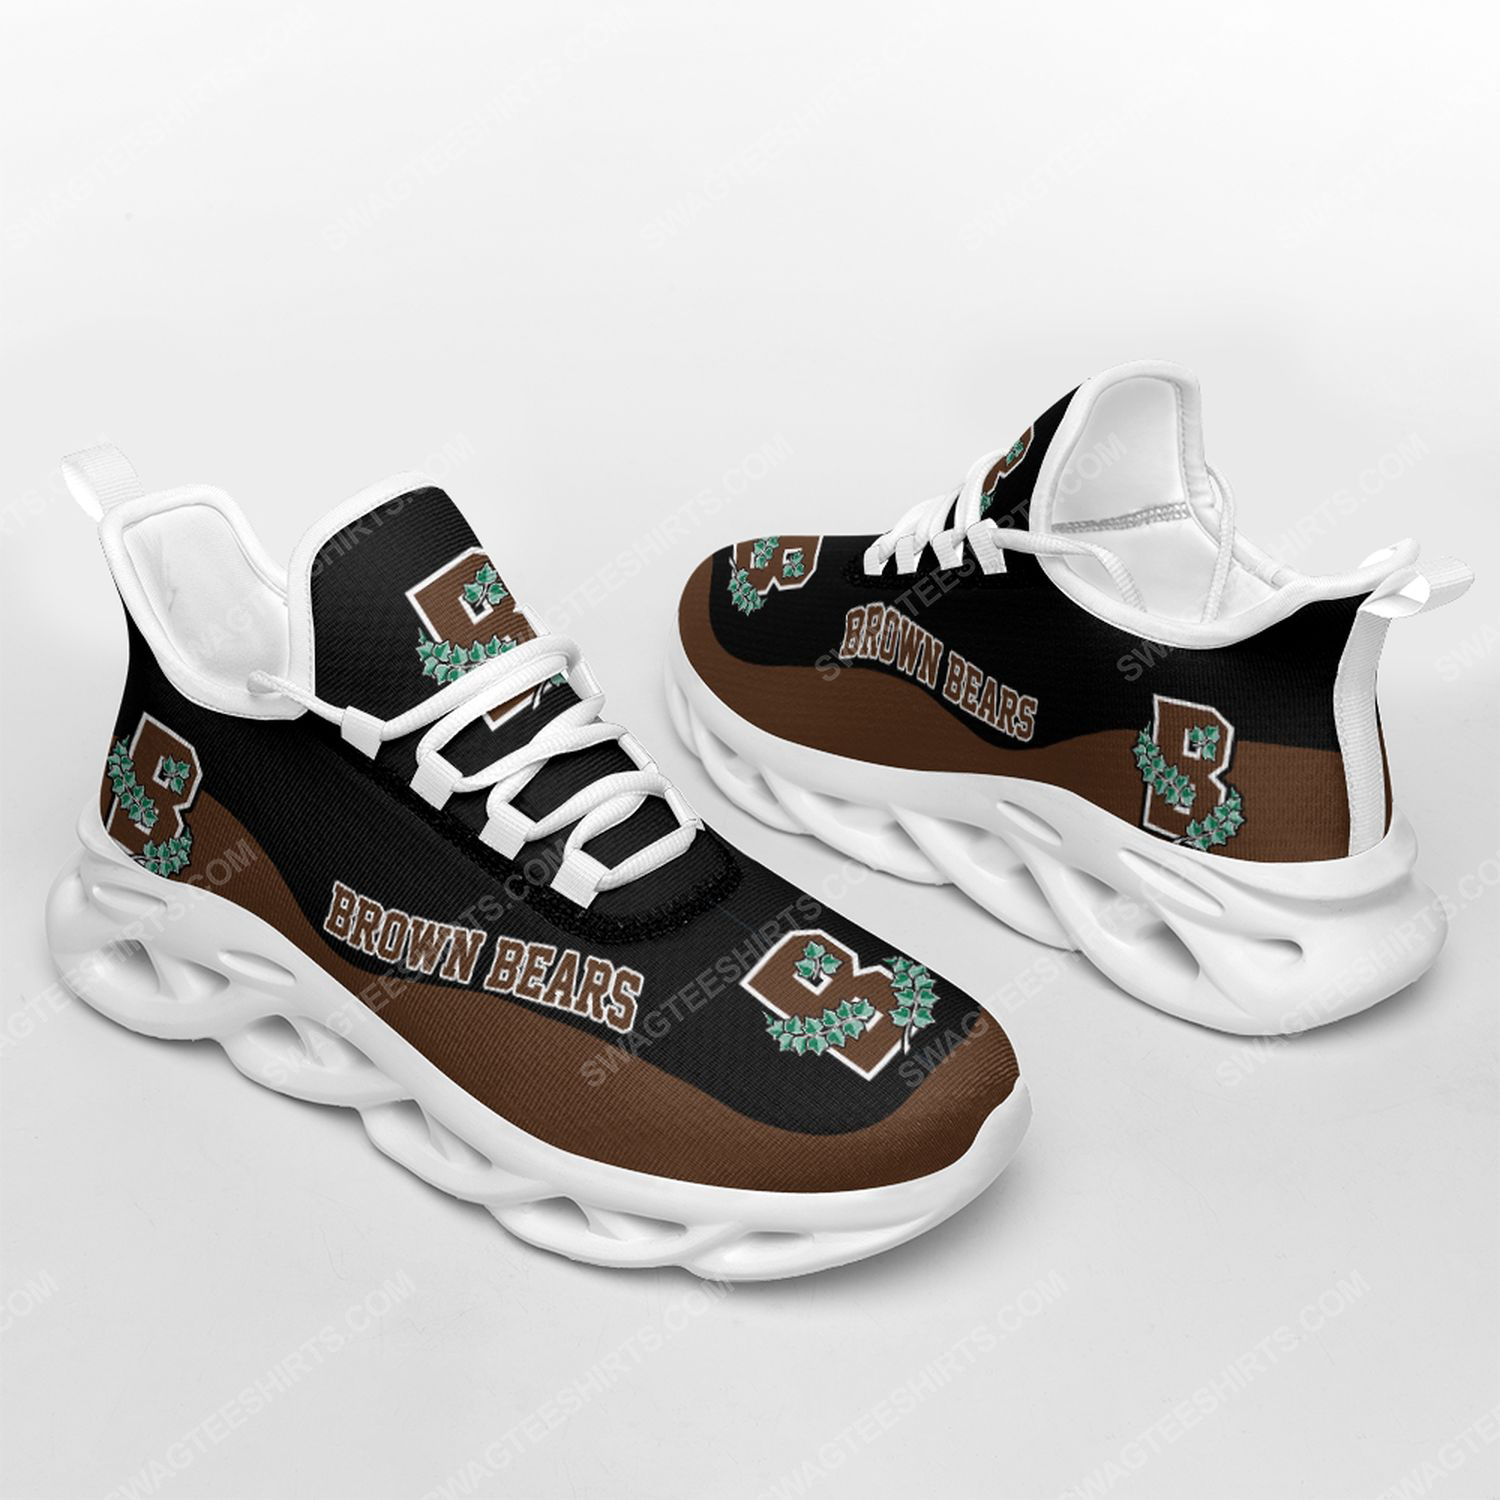 The brown bears football team max soul shoes 2